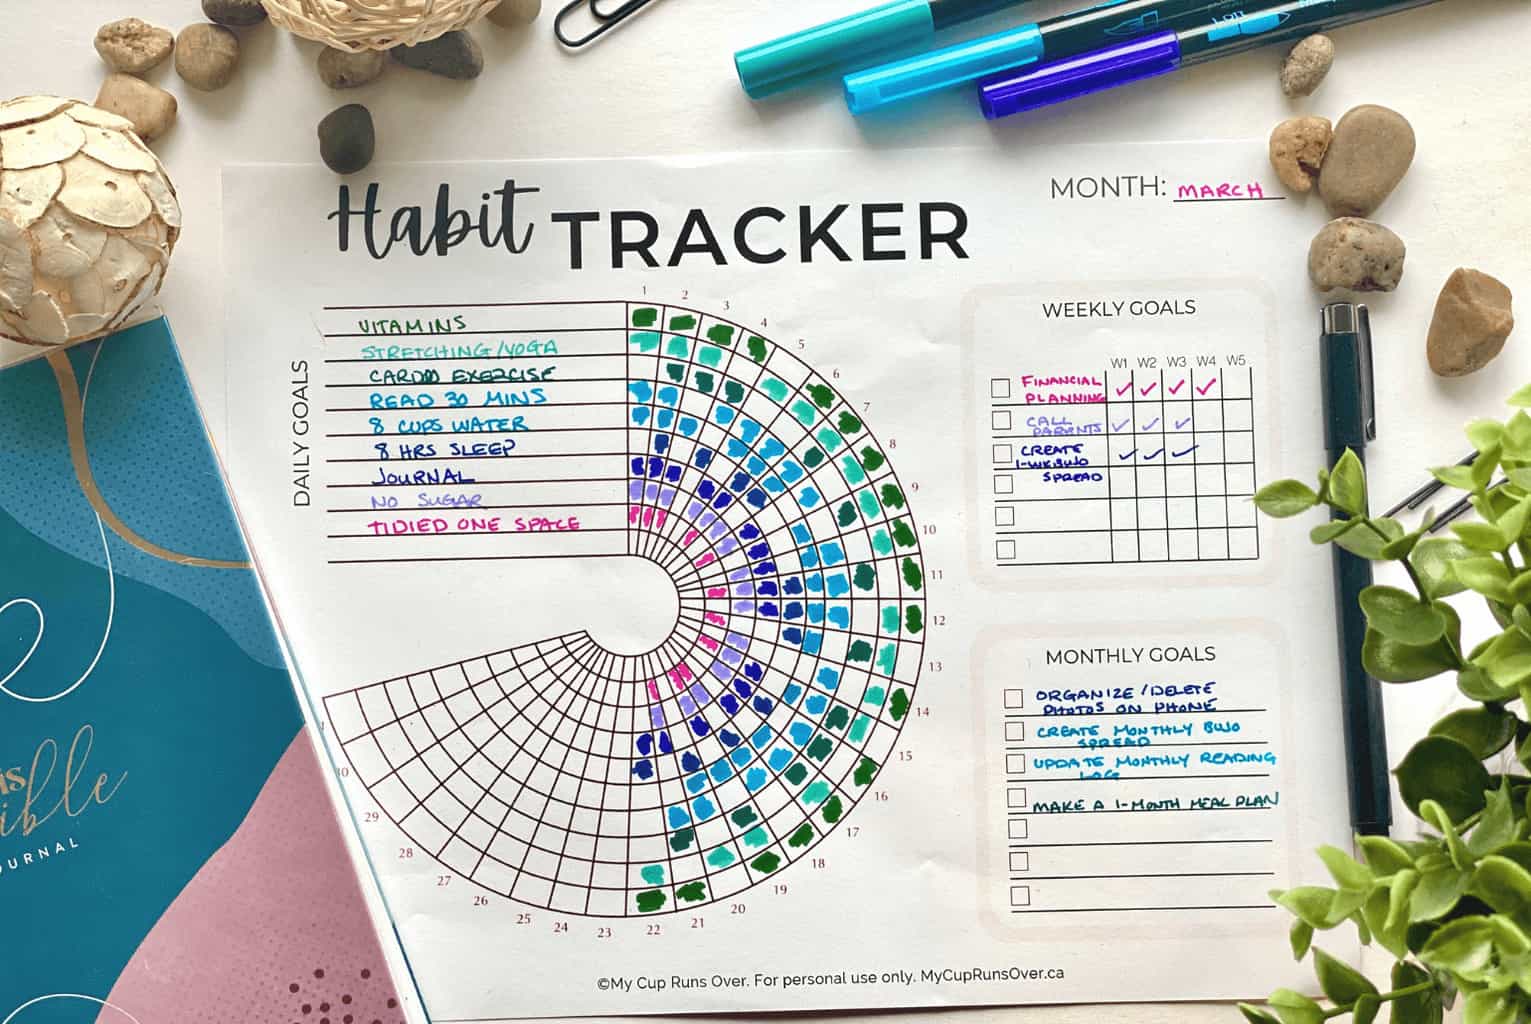 circle-habit-tracker-feature-my-cup-runs-over